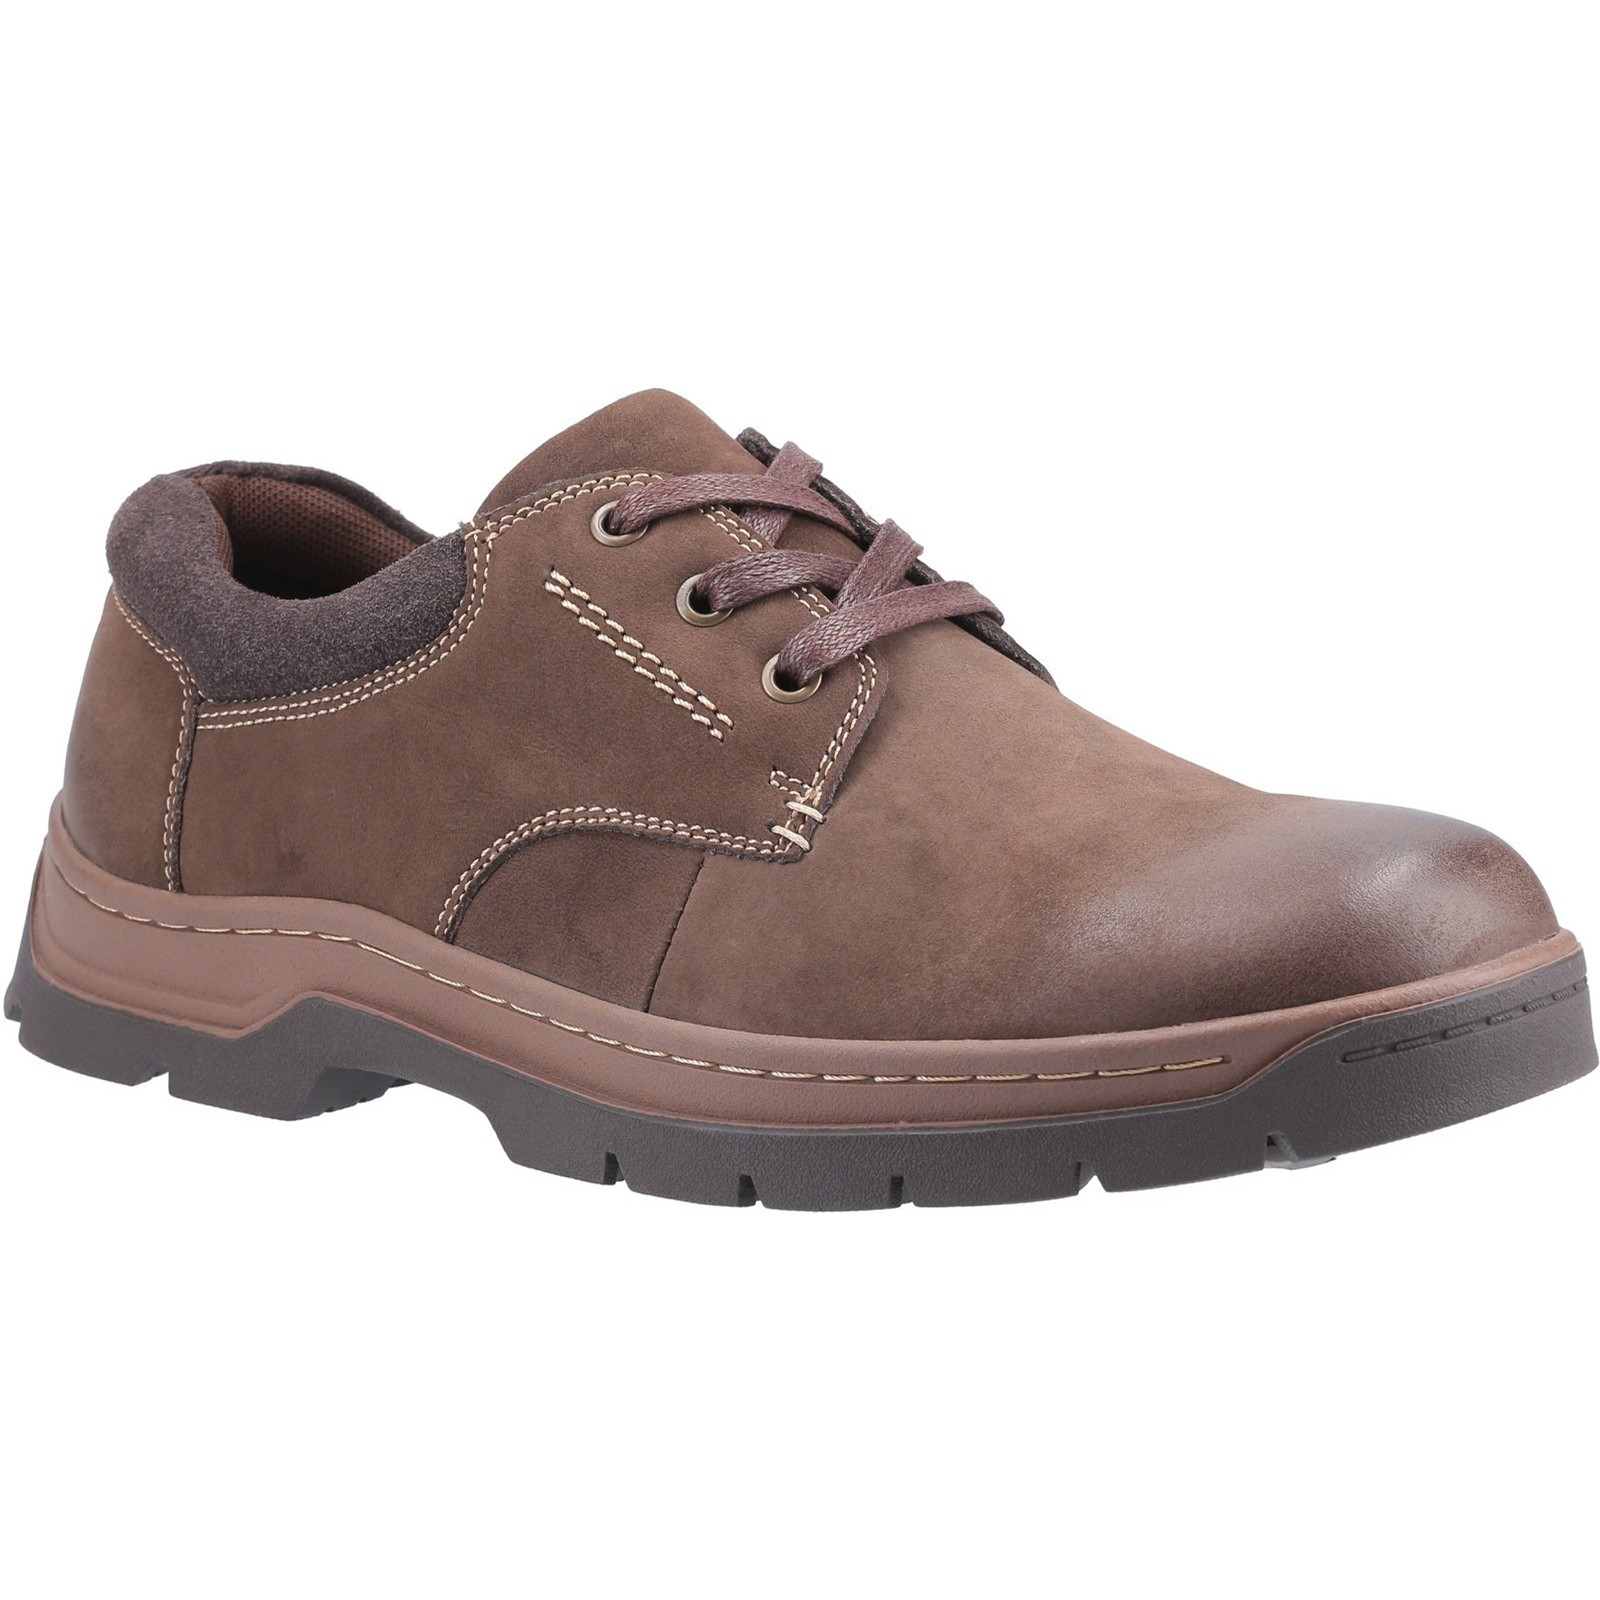 Thickwood Burnished Leather Casual Shoe